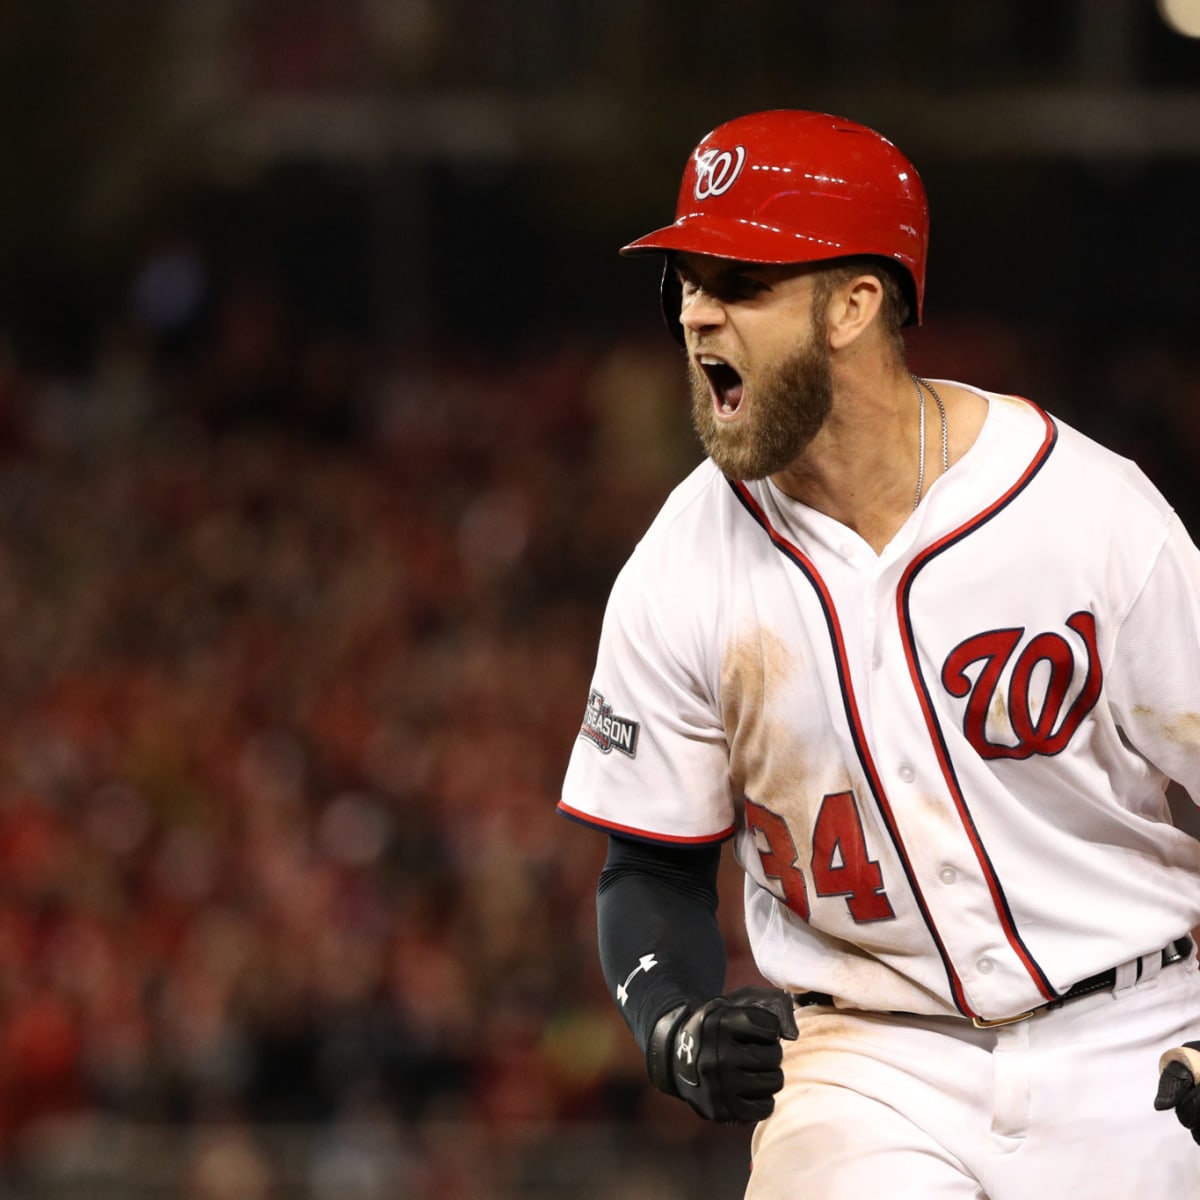 Why Bryce Harper Slumped in 2016 After an MVP Season